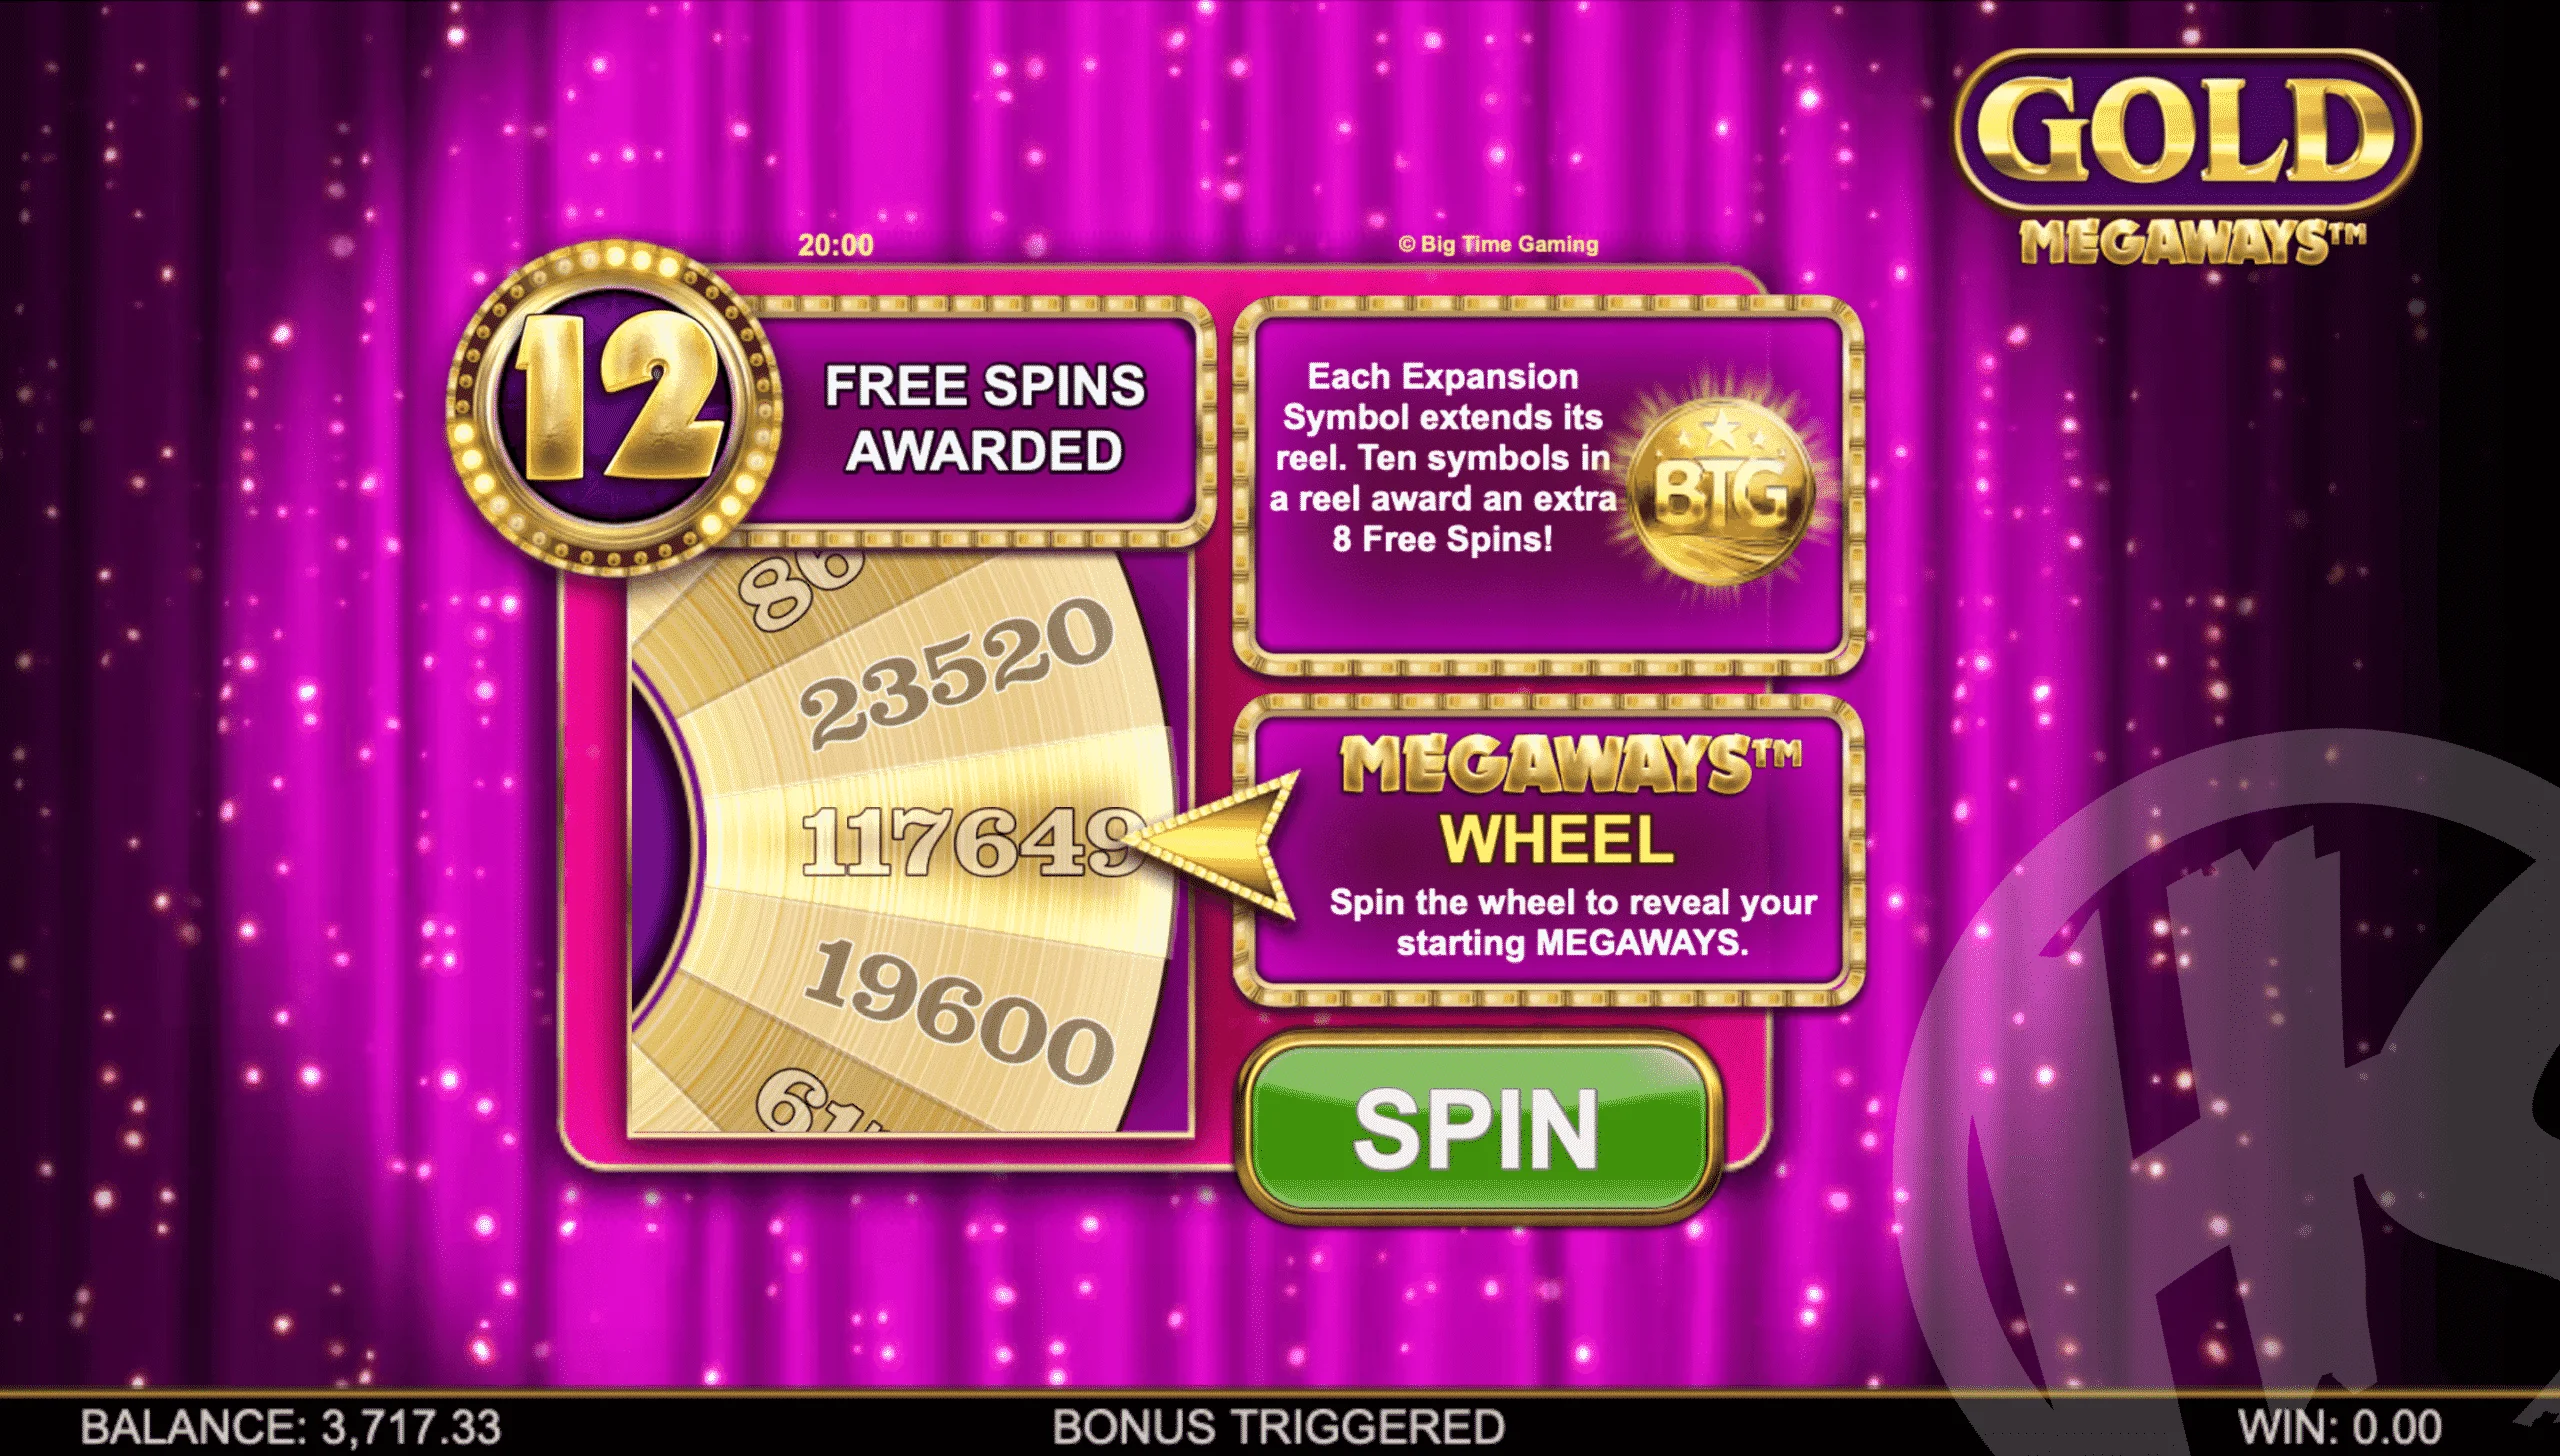 Spin The Wheel to Reveal Starting Megaways for Free Spins